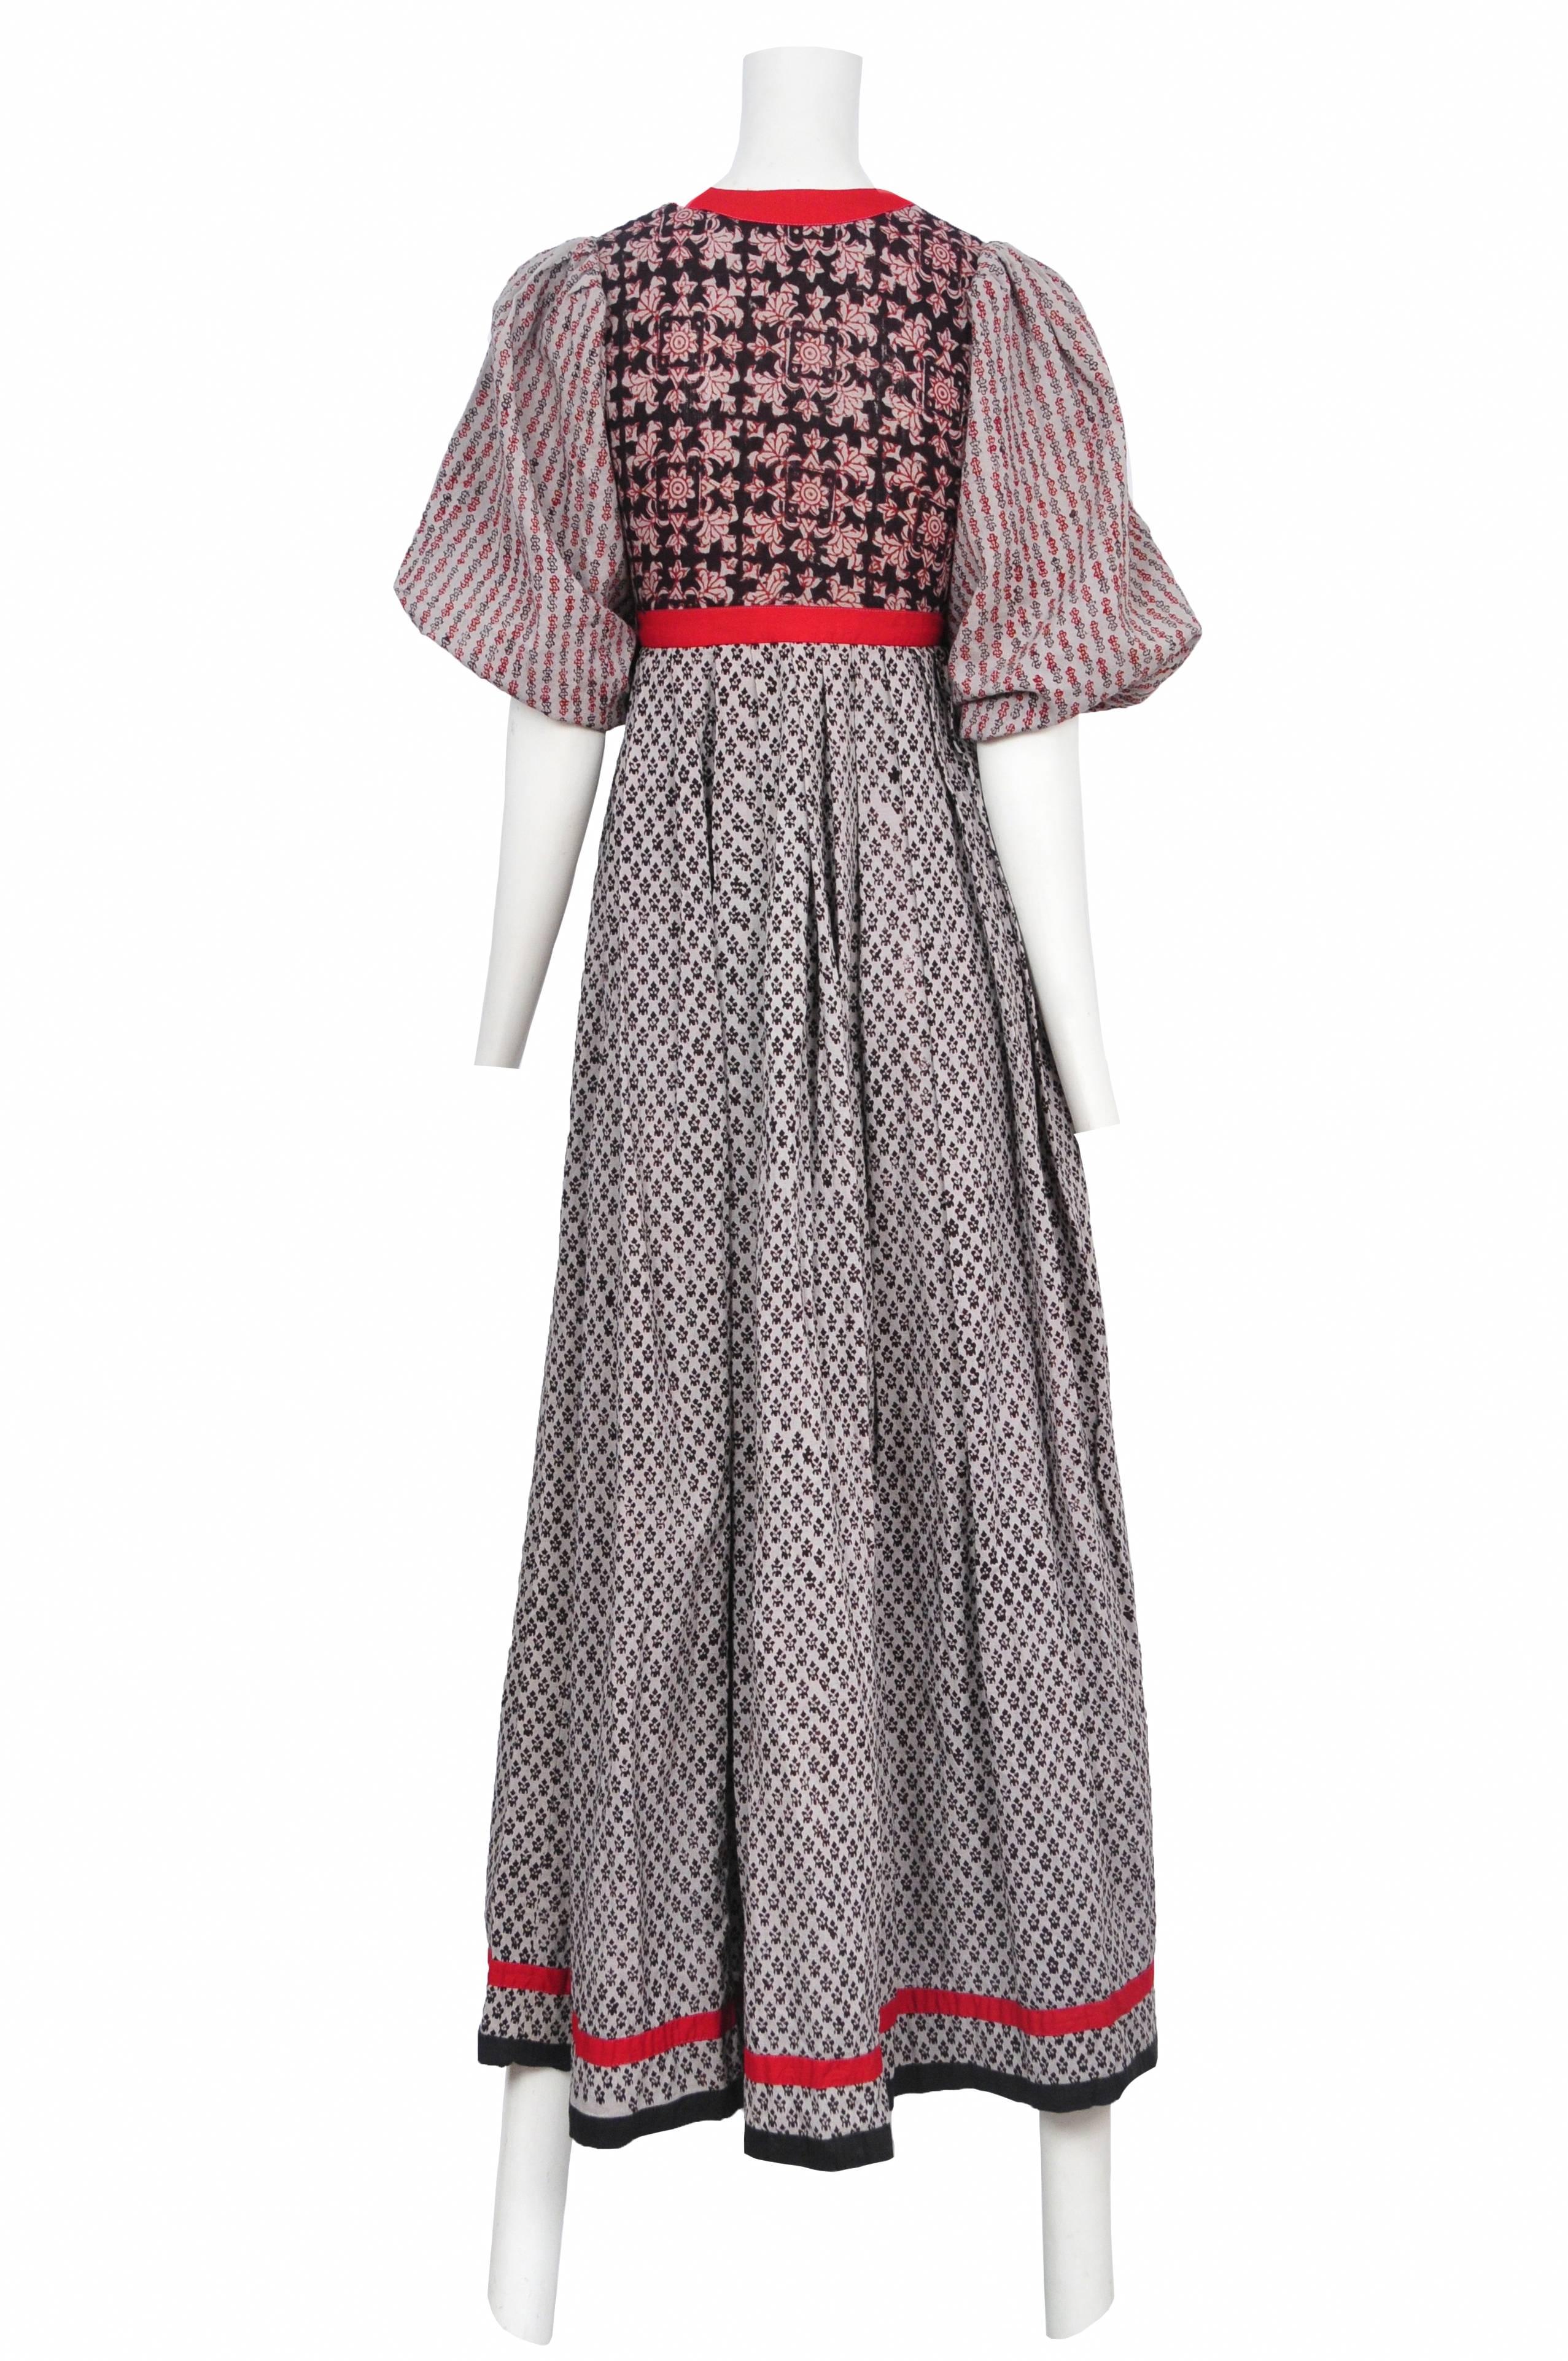 Vintage Thea Porter peasant dress featuring a bohemian chic print, plunging neckline, and empire waist. Circa 1970's.